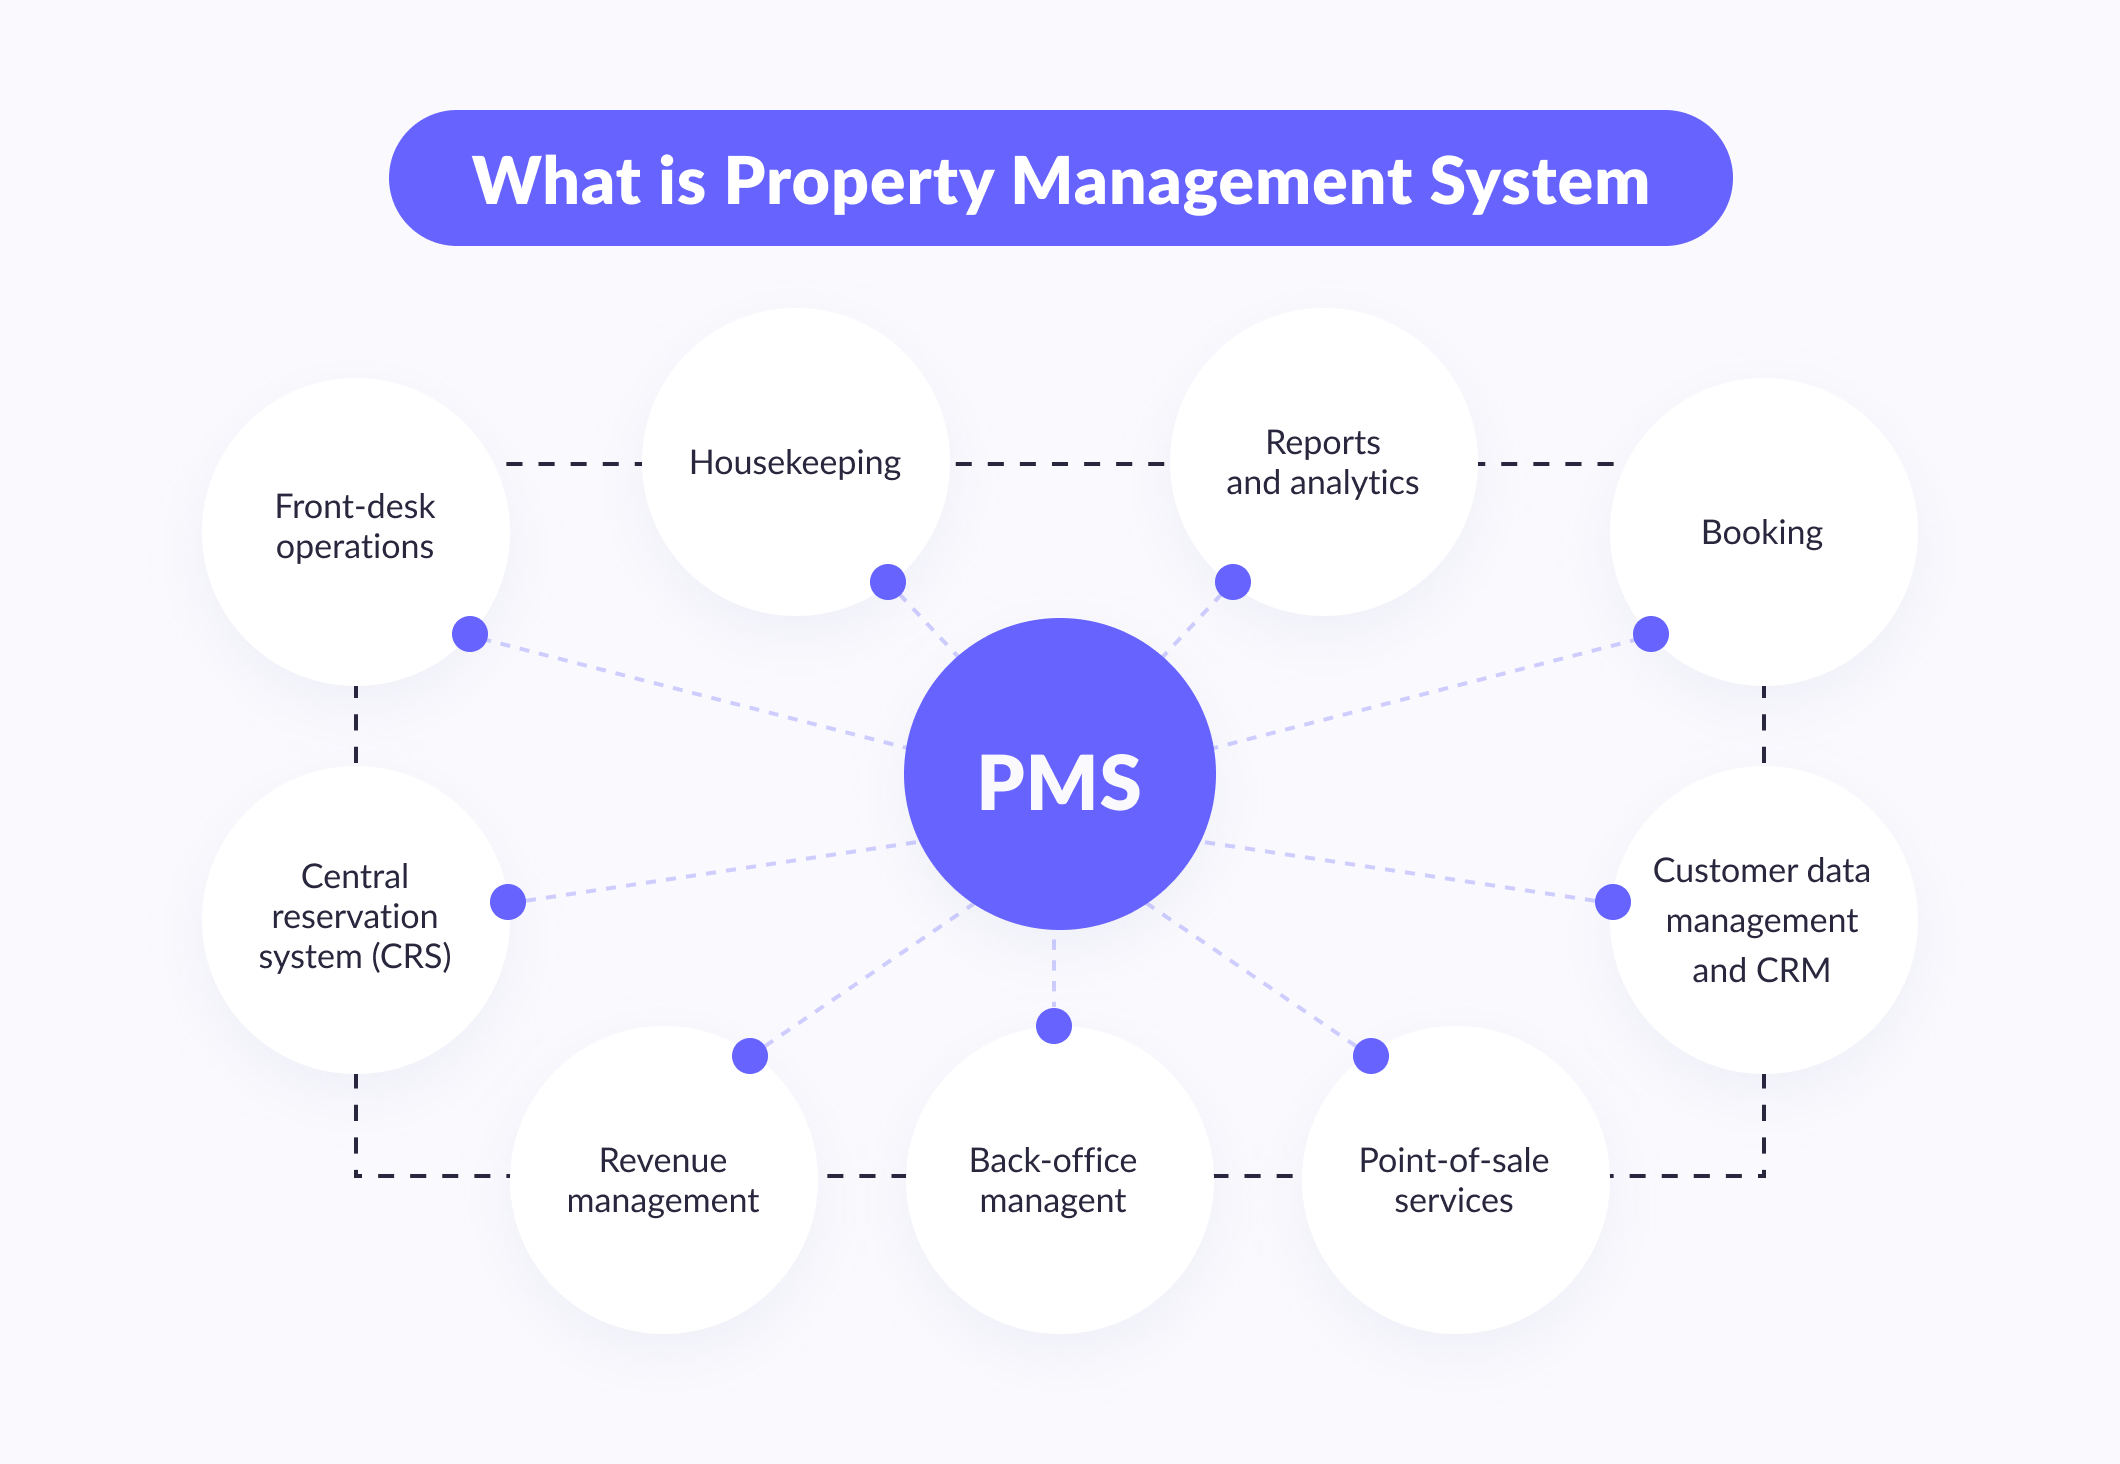 What is property management system (PMS)?